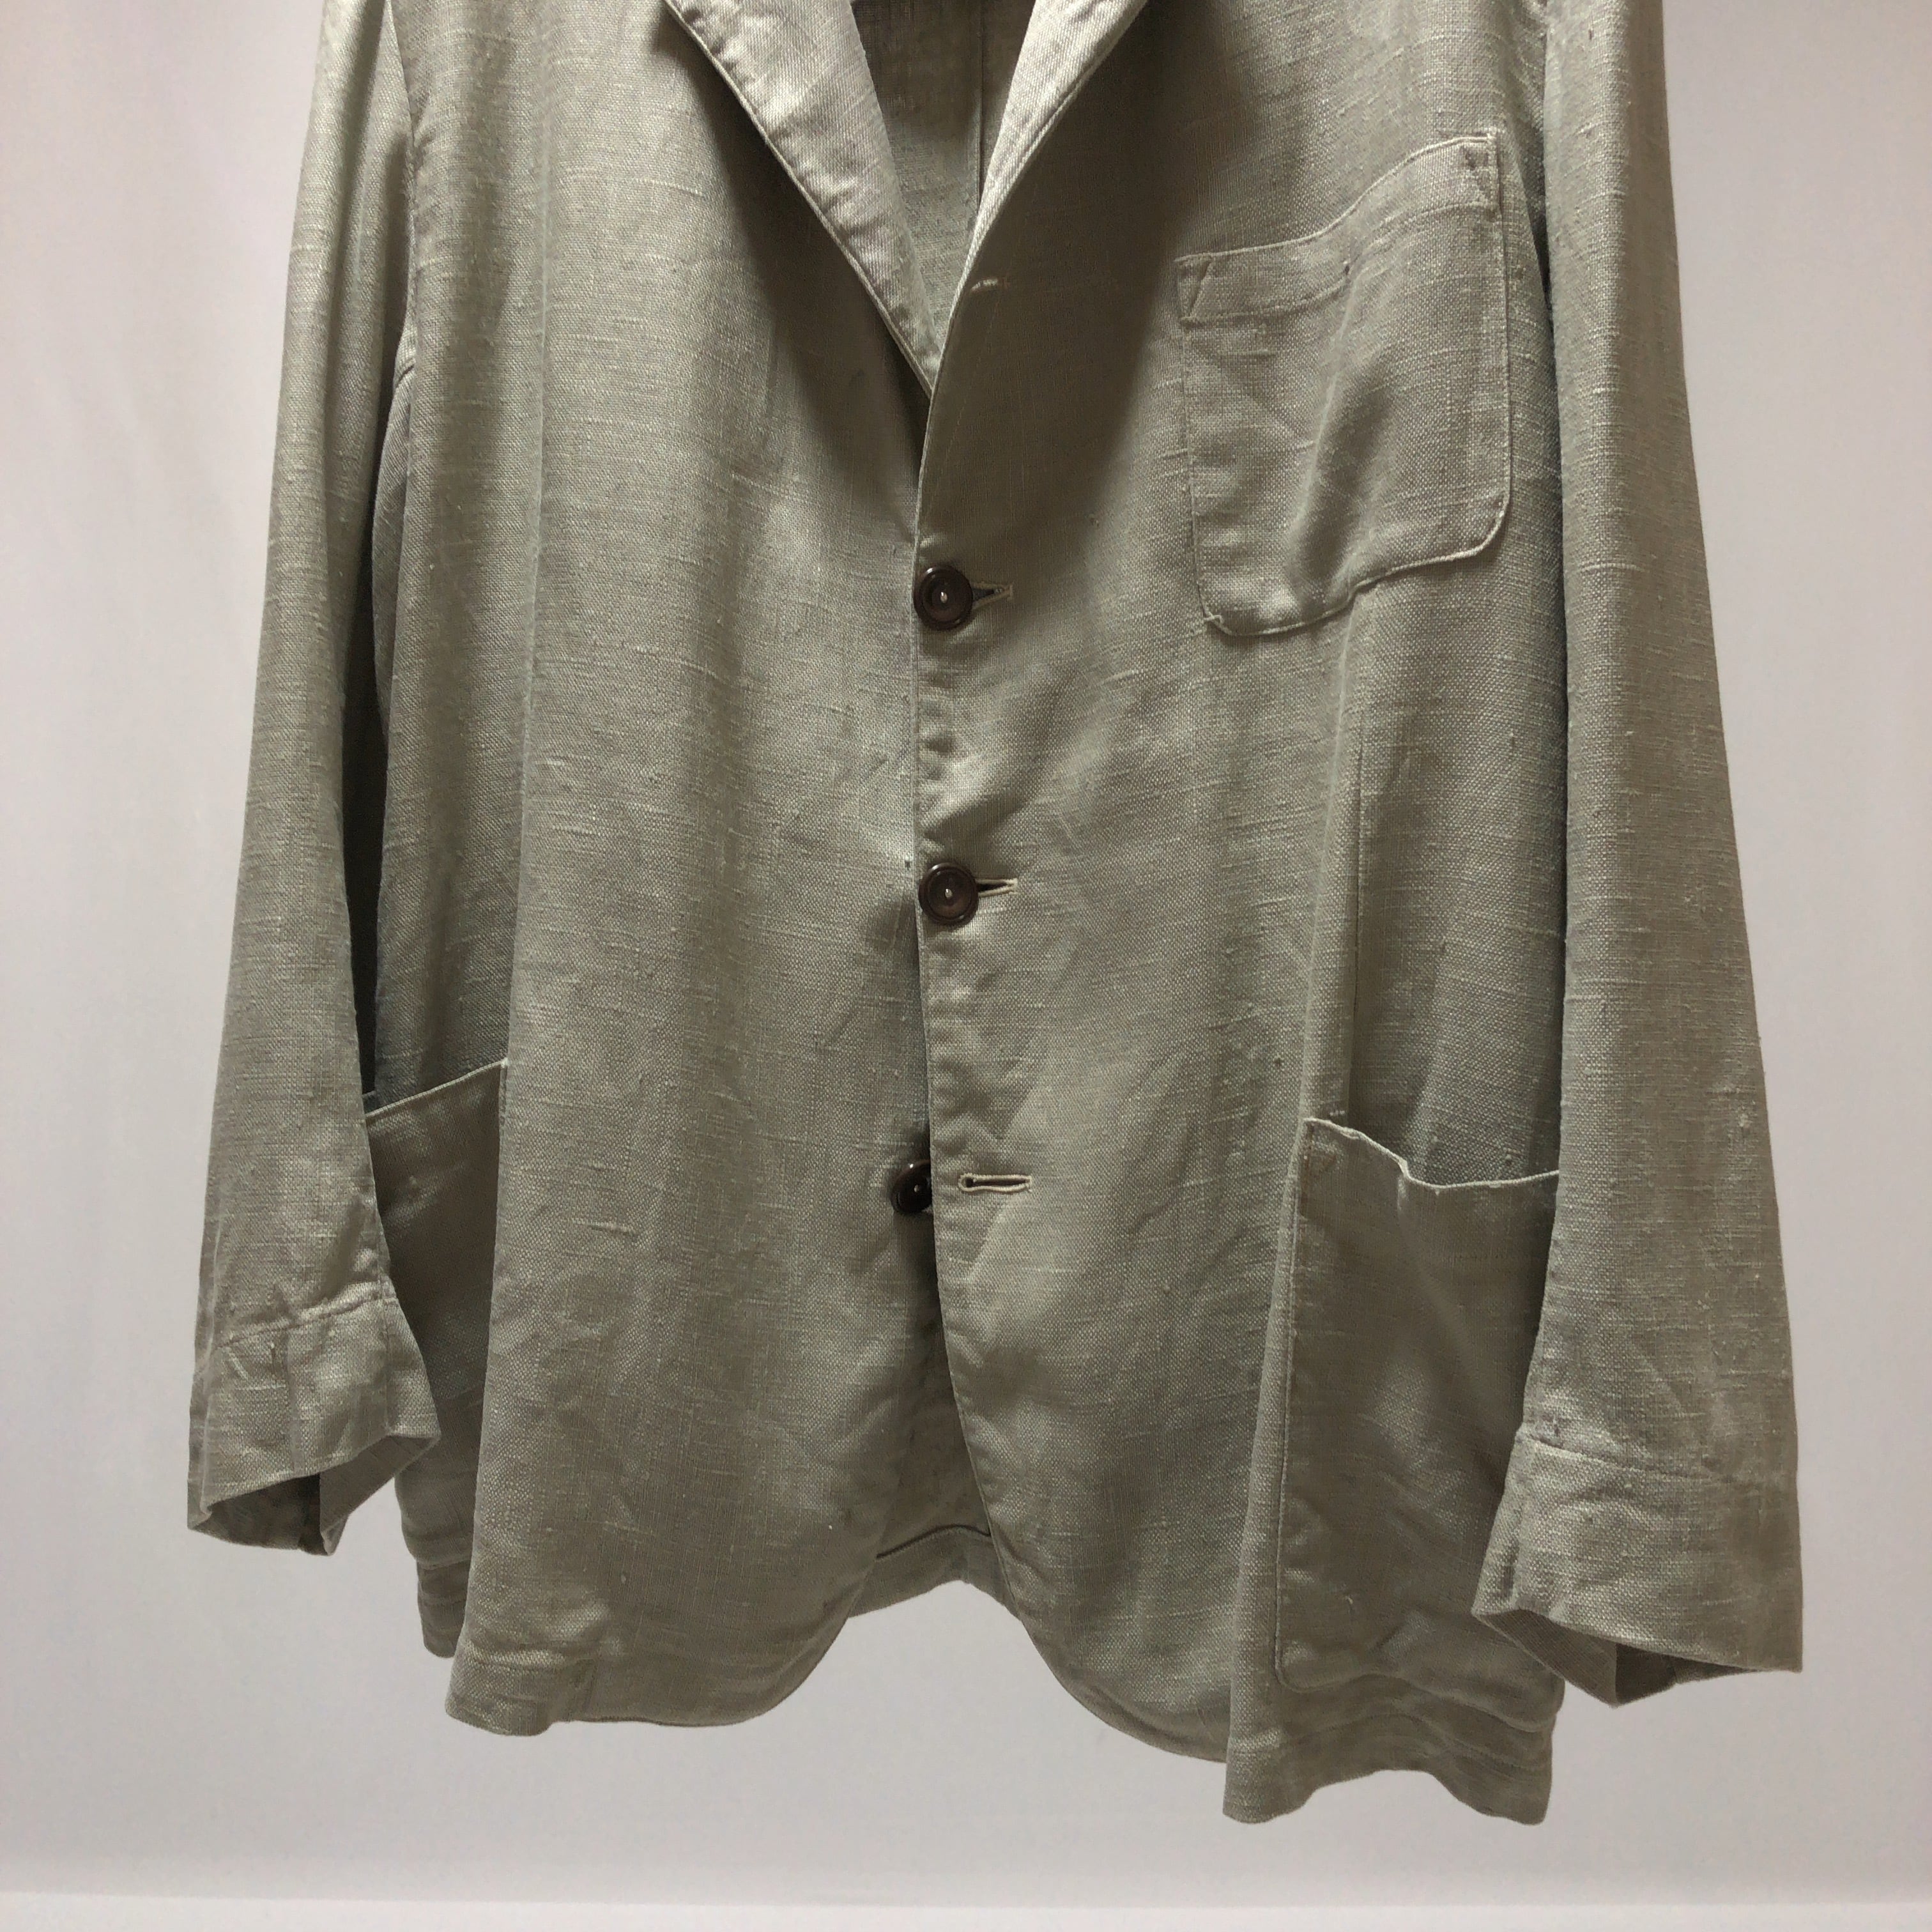 Grenvill / 30-40's Vintage Linen Tailored Jacket / Made in England